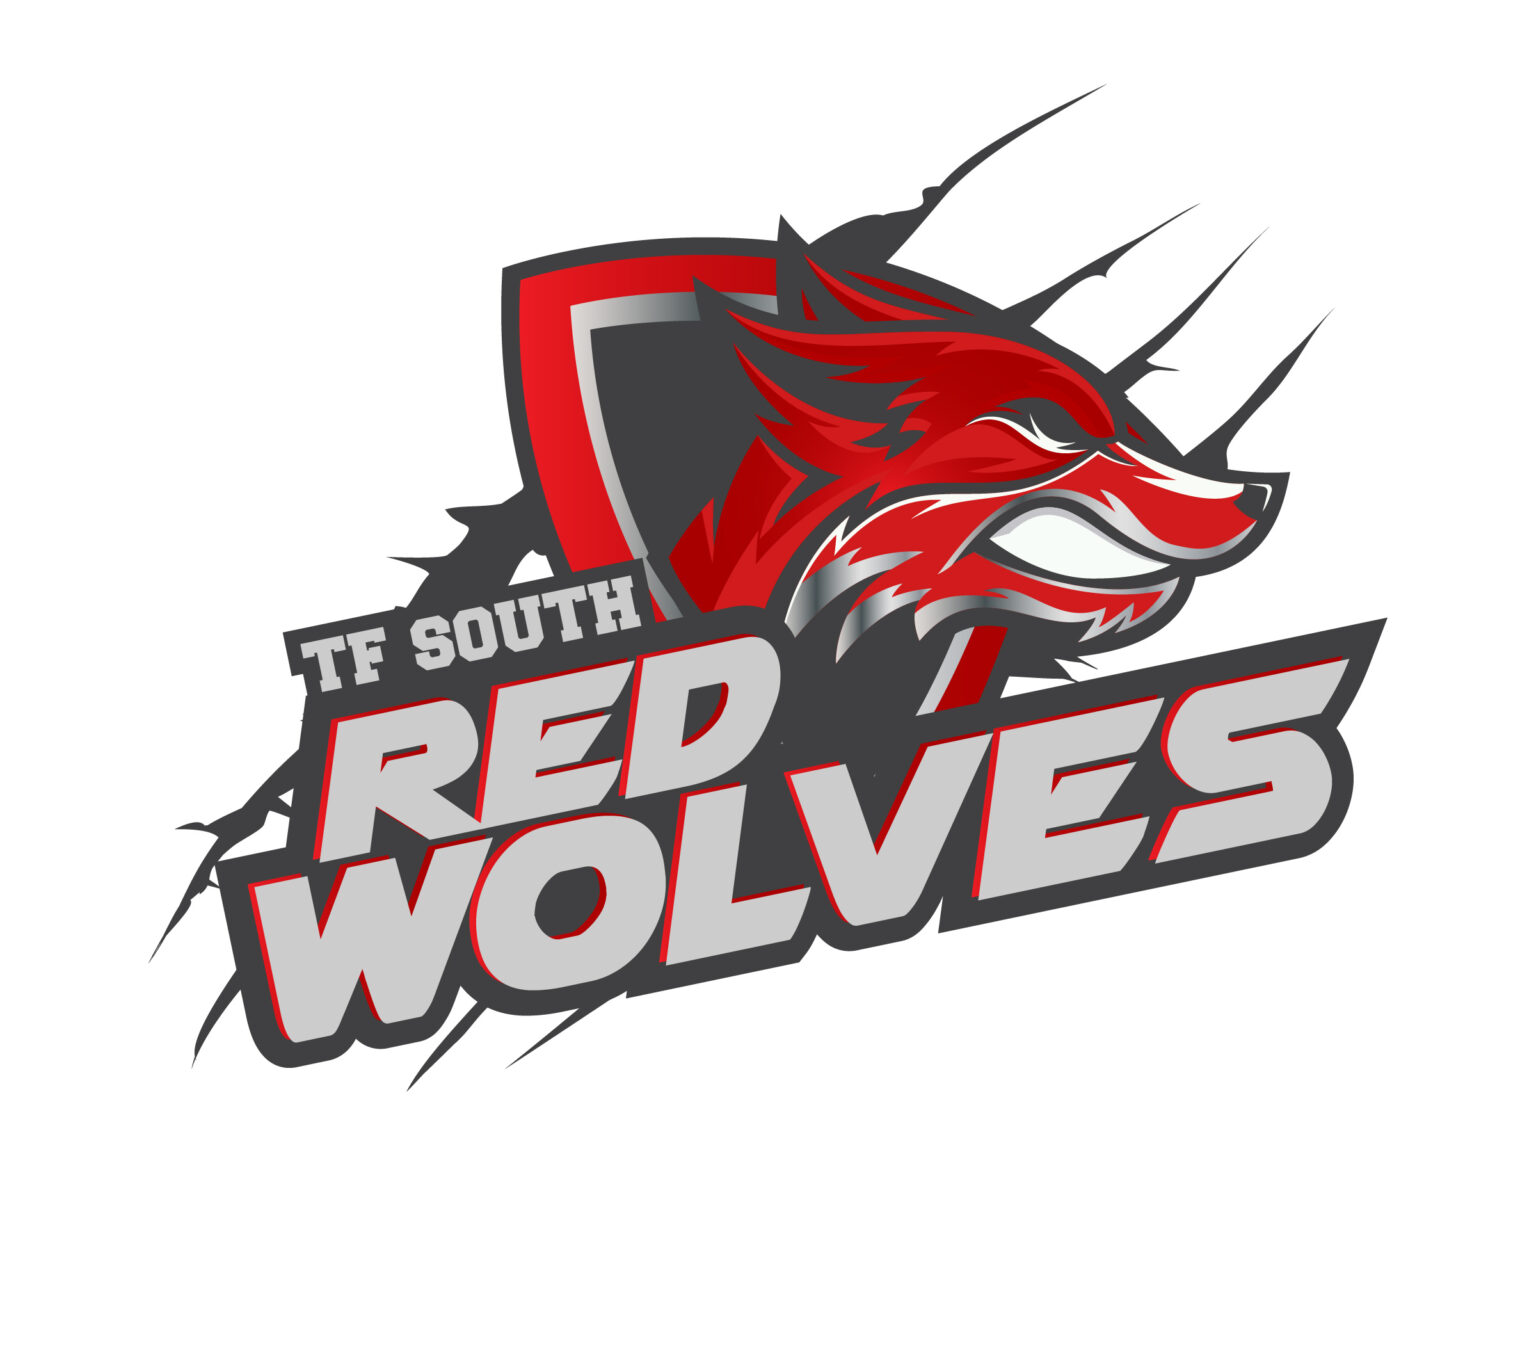 TF South unveils new Red Wolves logo and rebranding process begins